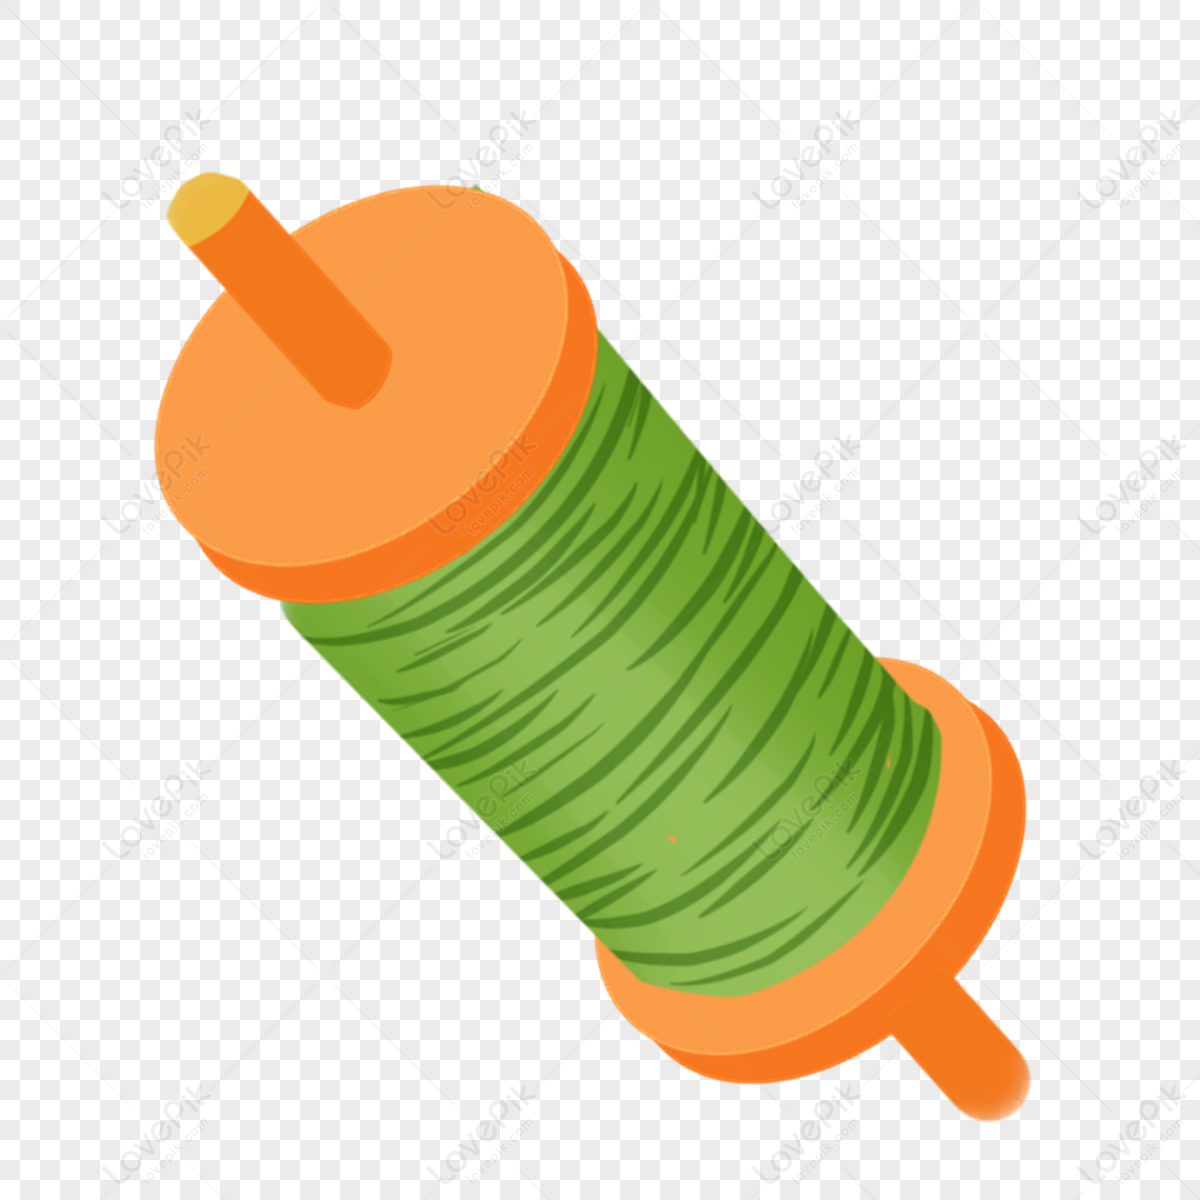 Sewing Thread With Needle PNG Images & PSDs for Download